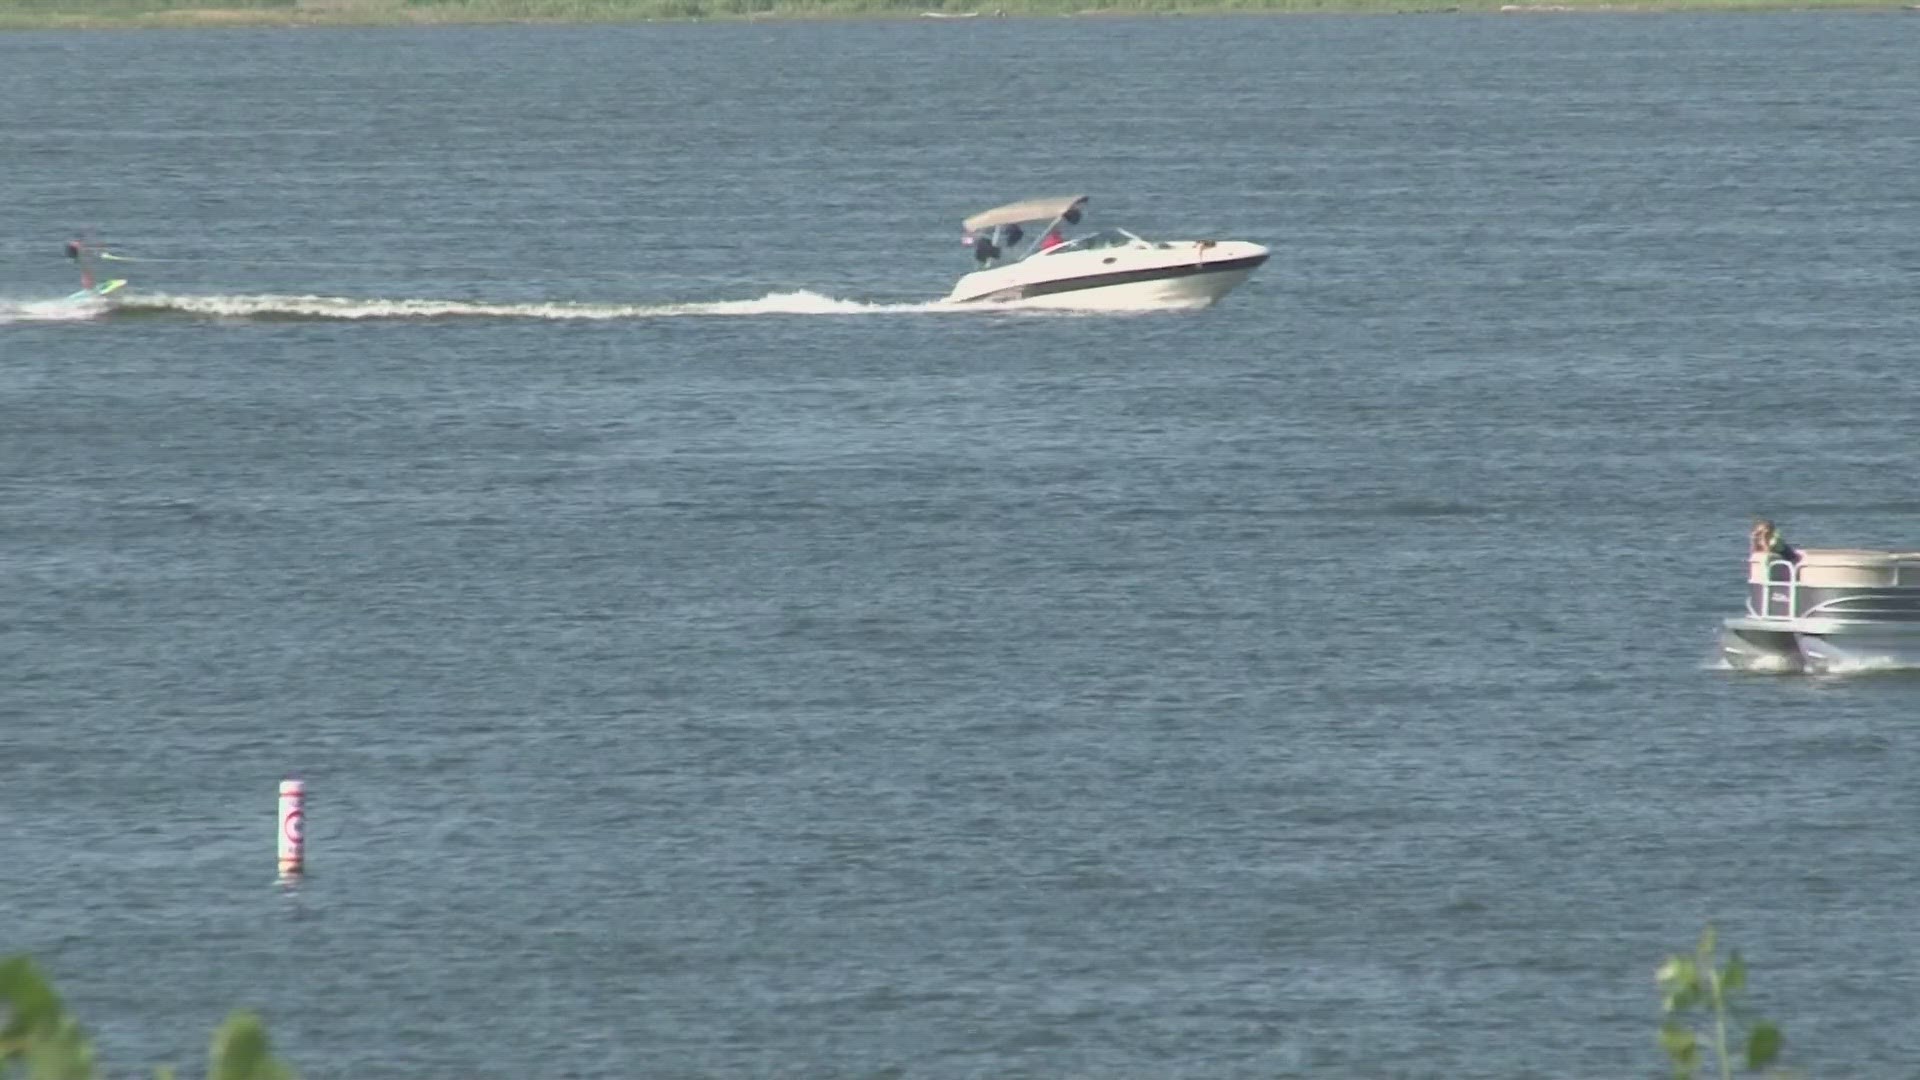 The holiday week brings lots of boating traffic to the lakes, which can cause accidents.